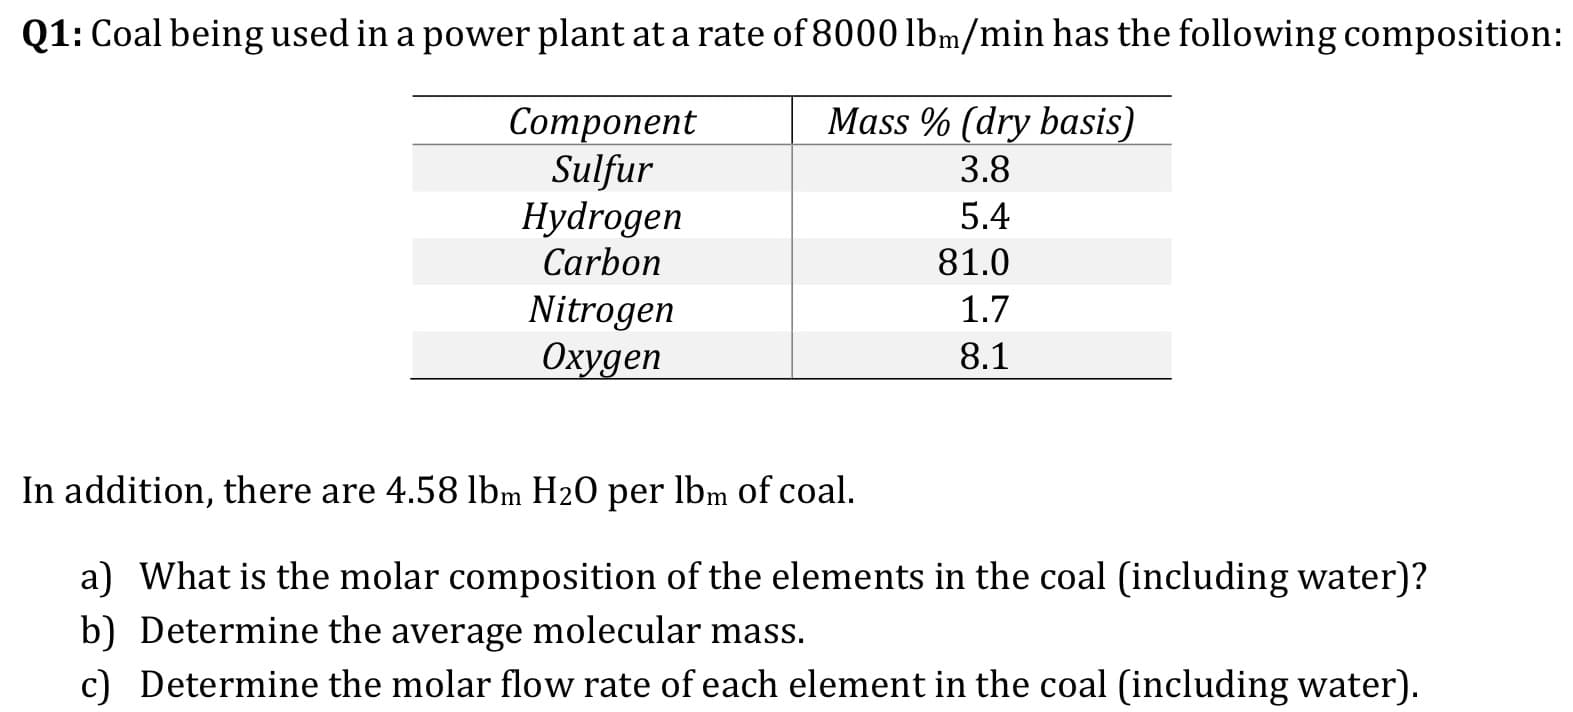 Q1: Coal being used in a power plant at a rate of 8000 lbm/min has the following composition:
Mass % (dry basis)
Соmponent
Sulfur
Hydrogen
Carbon
3.8
5.4
81.0
Nitrogen
Охудеп
1.7
8.1
In addition, there are 4.58 1lbm H20 per lbm of coal.
a) What is the molar composition of the elements in the coal (including water)?
b) Determine the
c) Determine the molar flow rate of each element in the coal (including water)
molecular mass.
average
